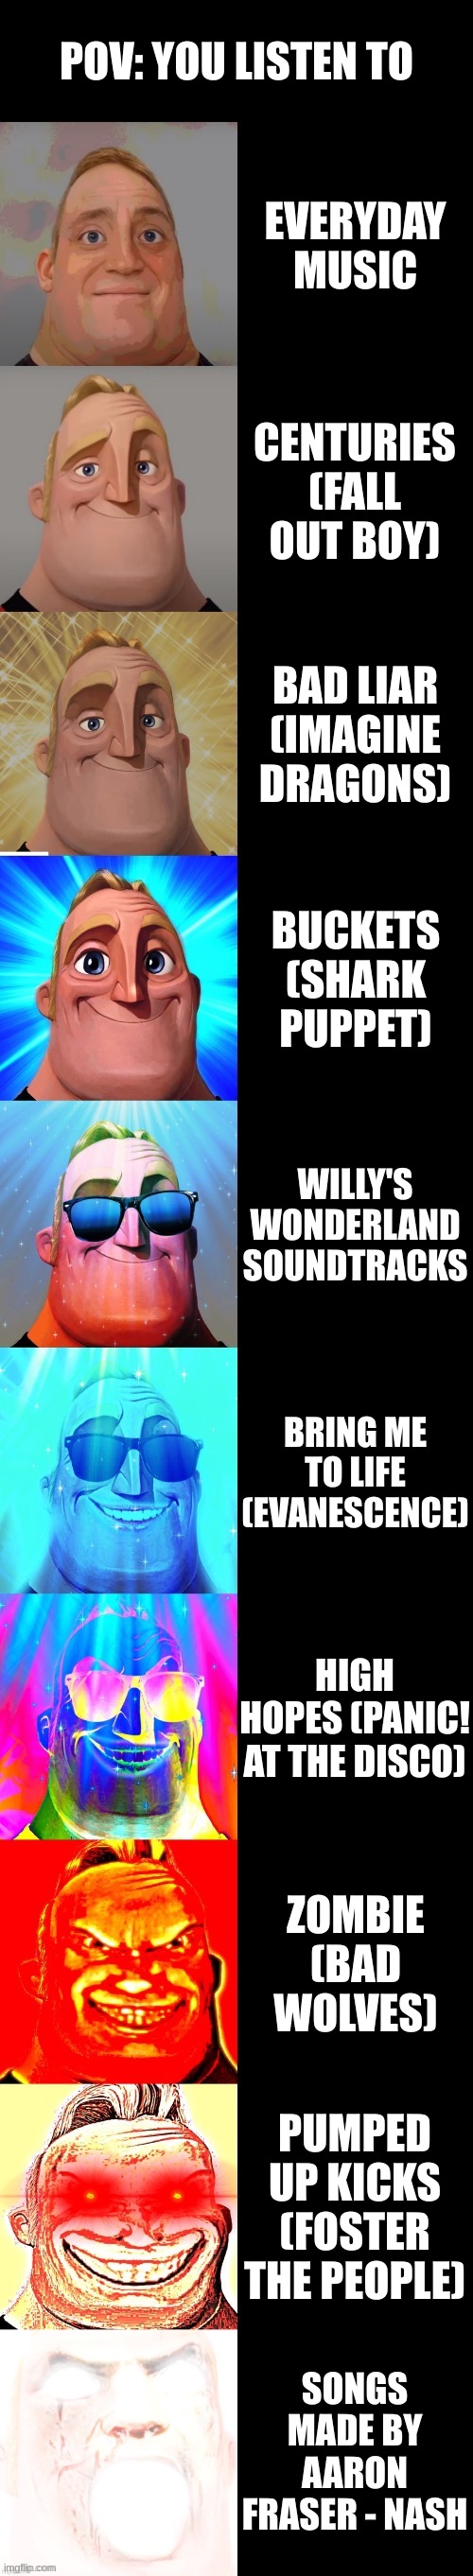 Mr Incredible Becoming Old Music